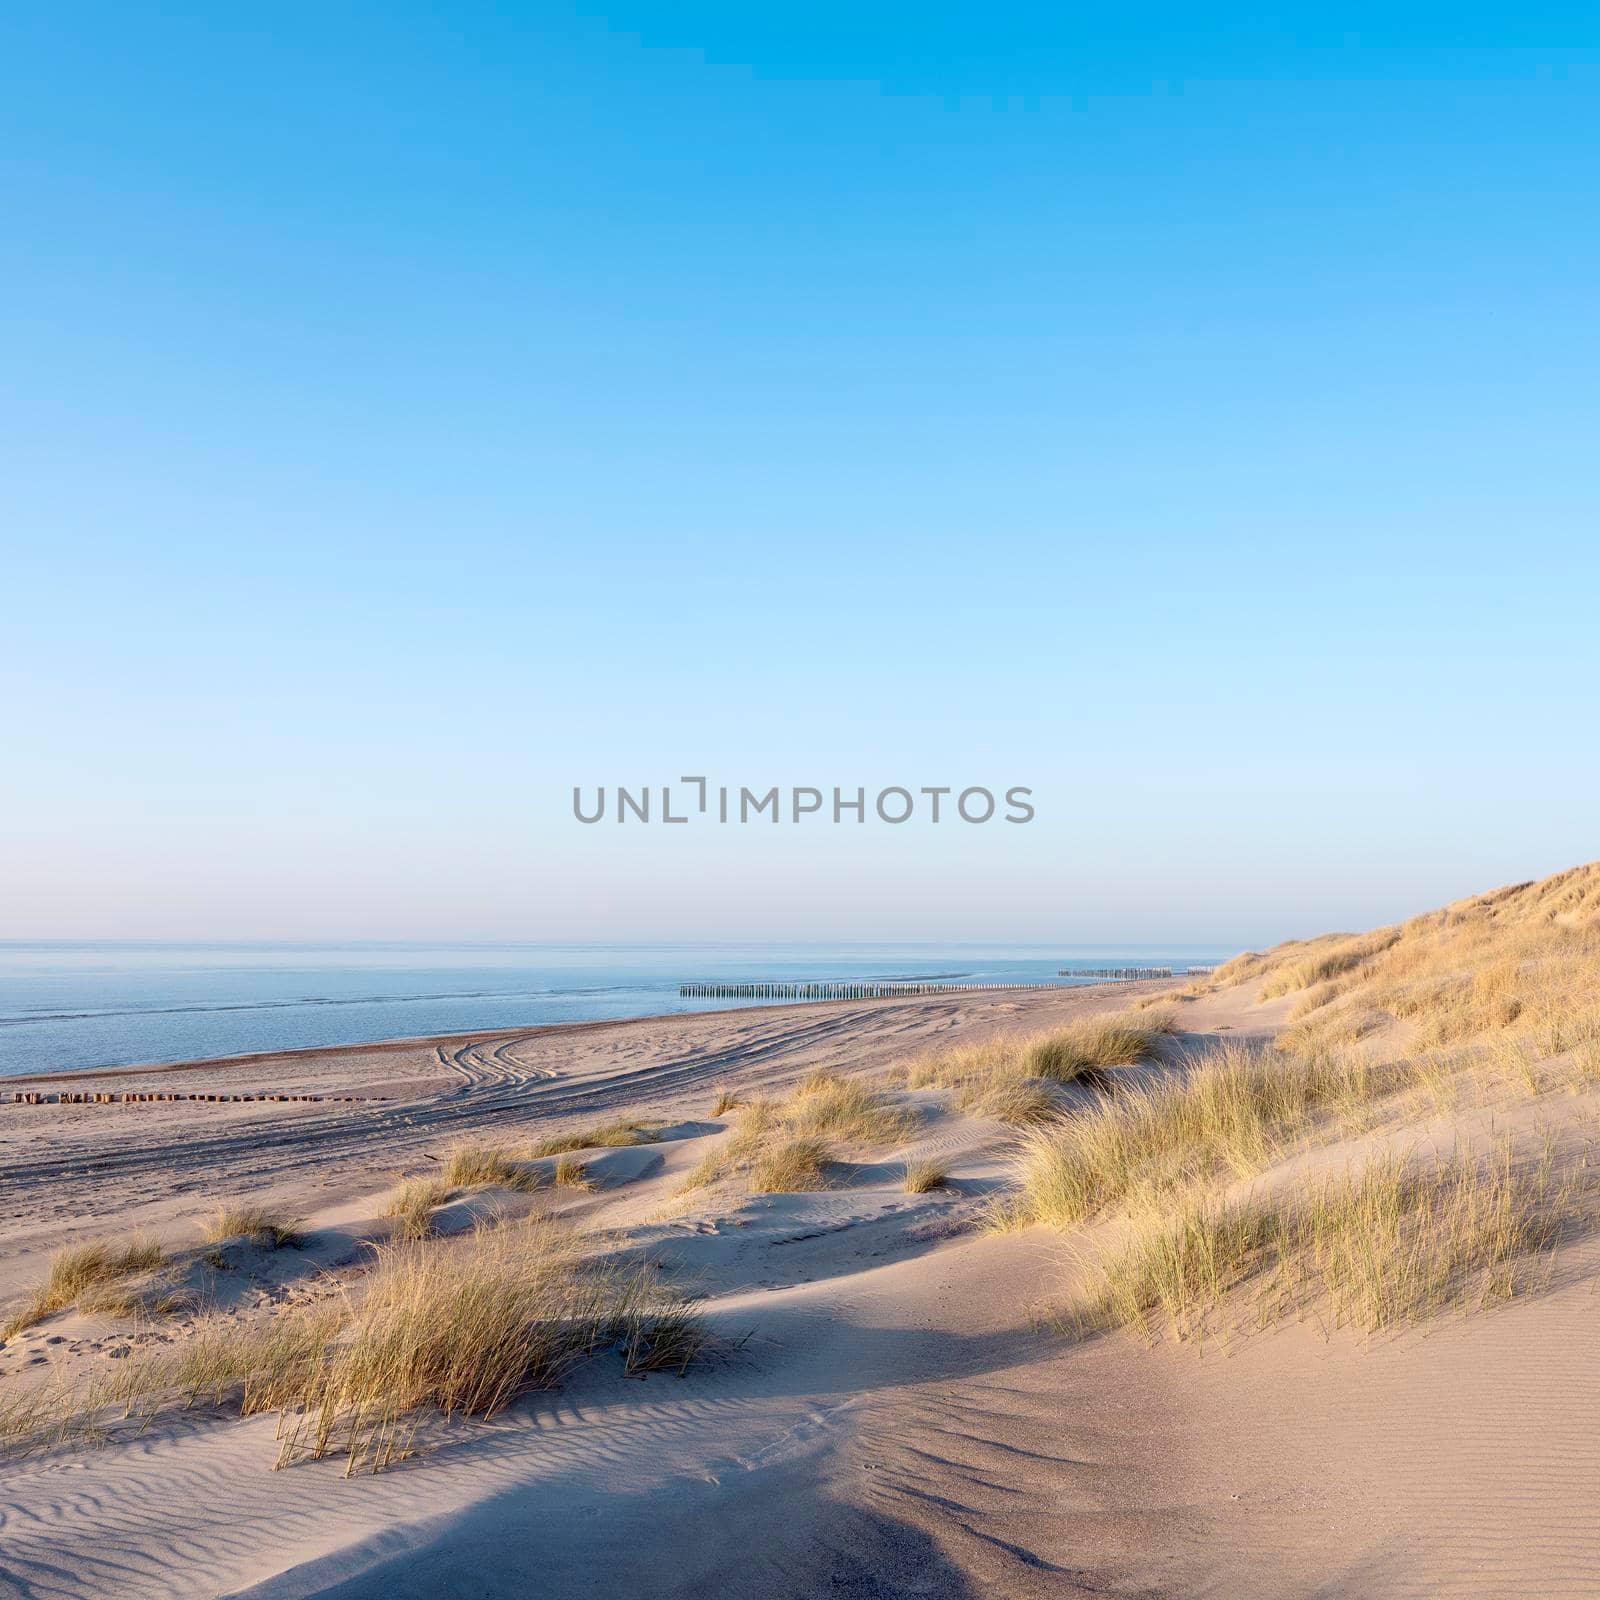 sand dunes and deserted beach on the dutch coast of north sea in province of zeeland under blue sky in spring